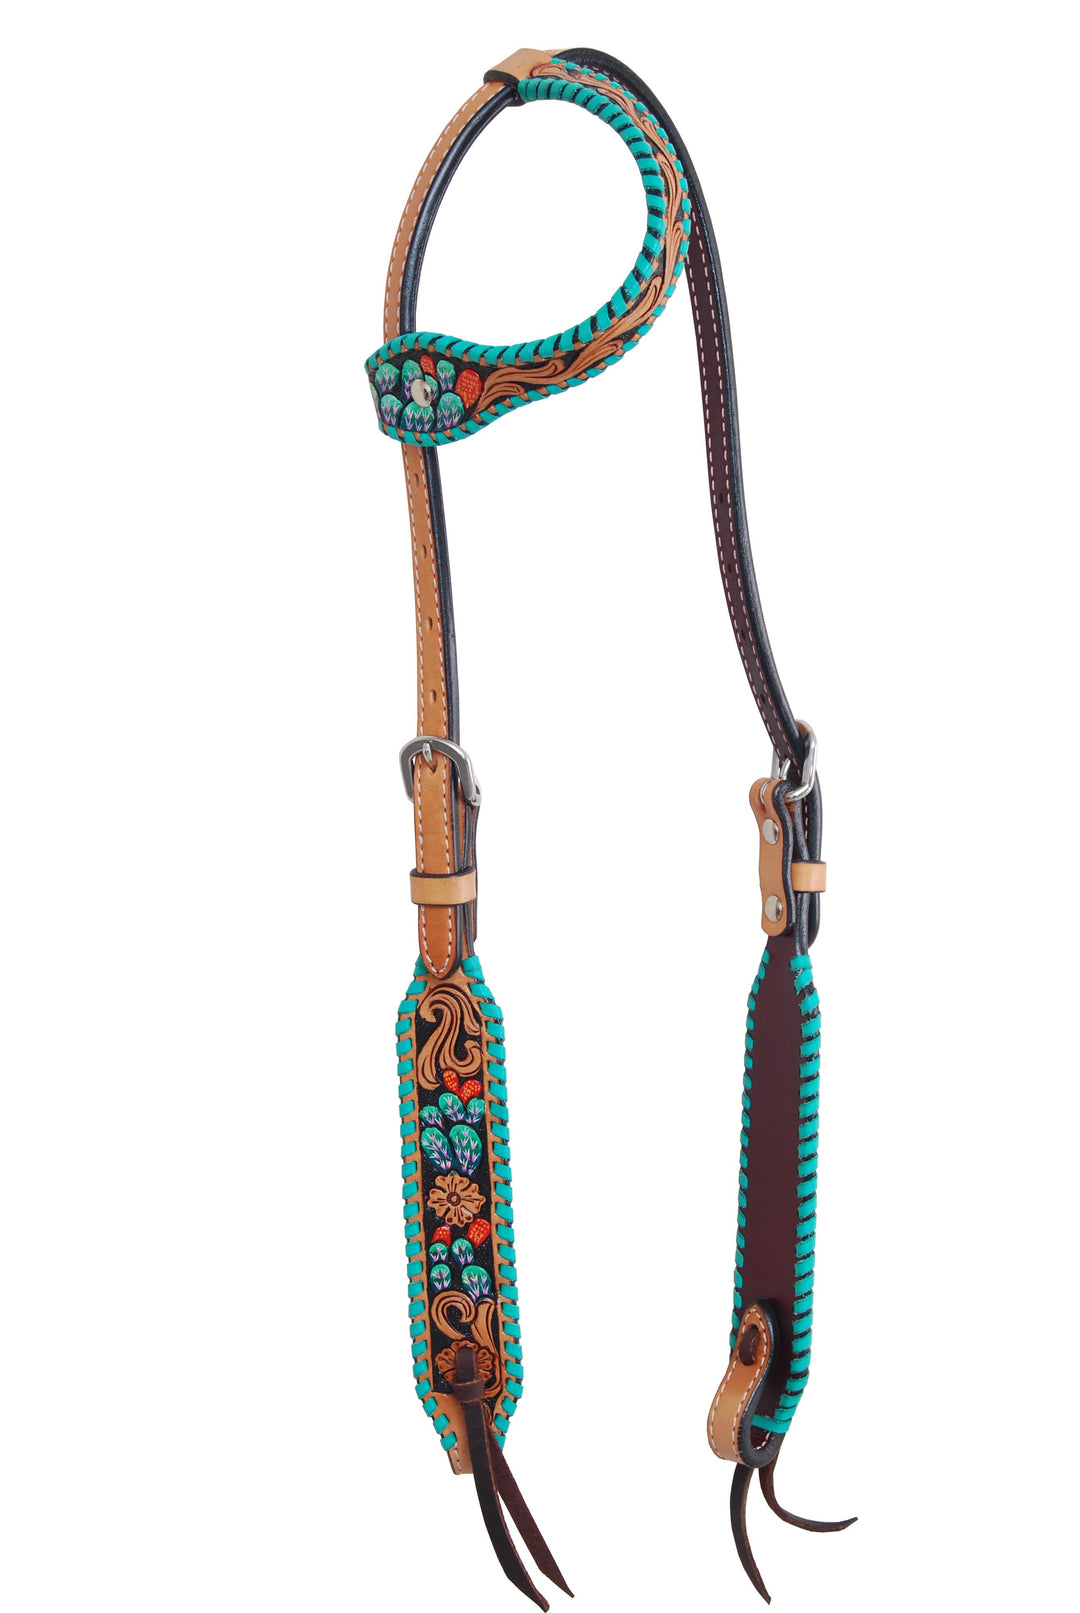 Rafter T Ranch Single Ear Painted Cactus Headstall